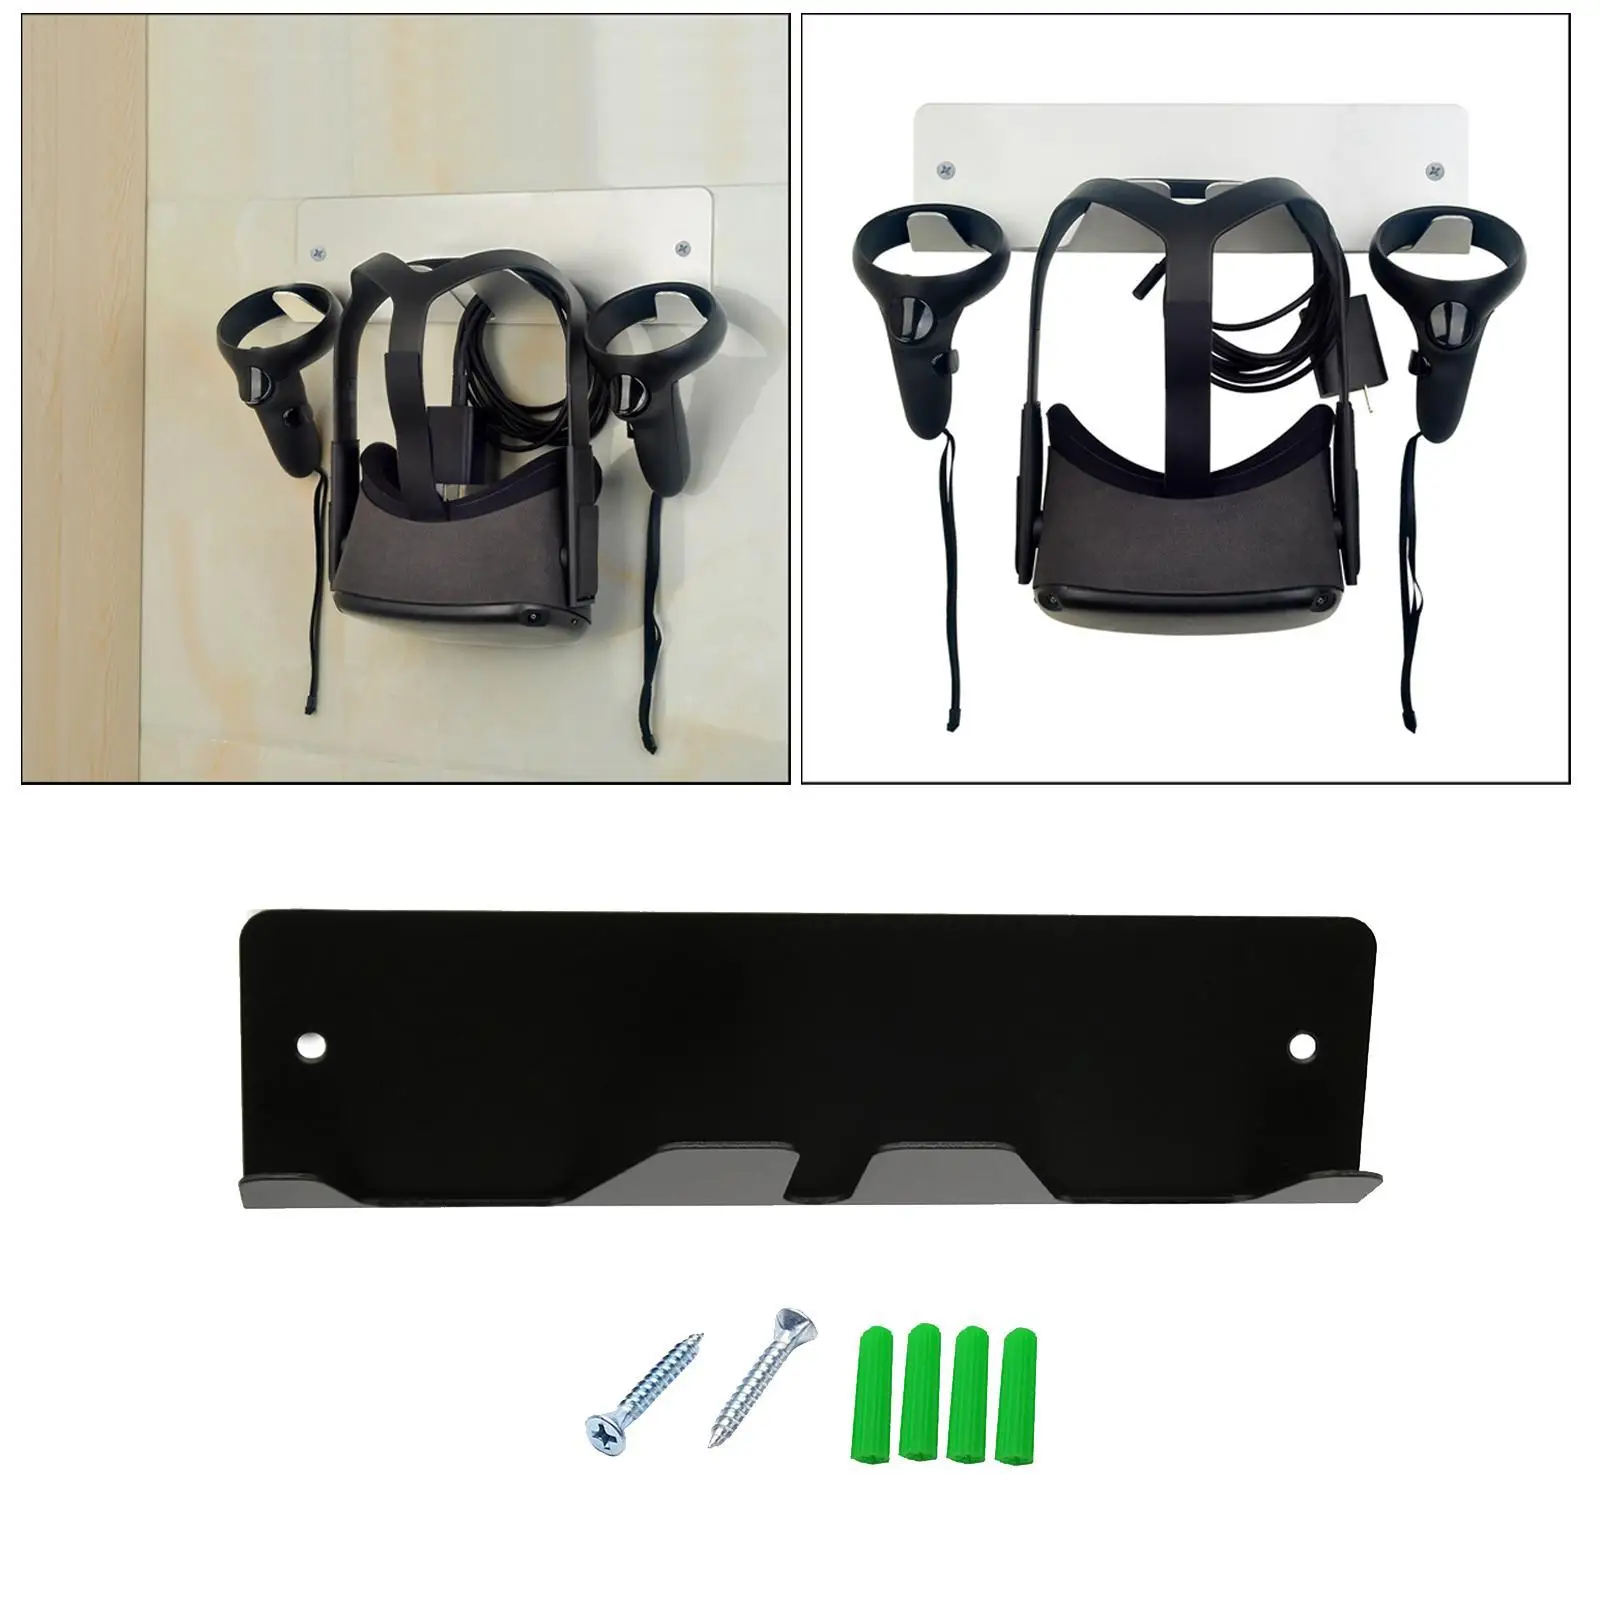 VR Stand Wall Mount Storage Hook For Rift S HTC Vive 